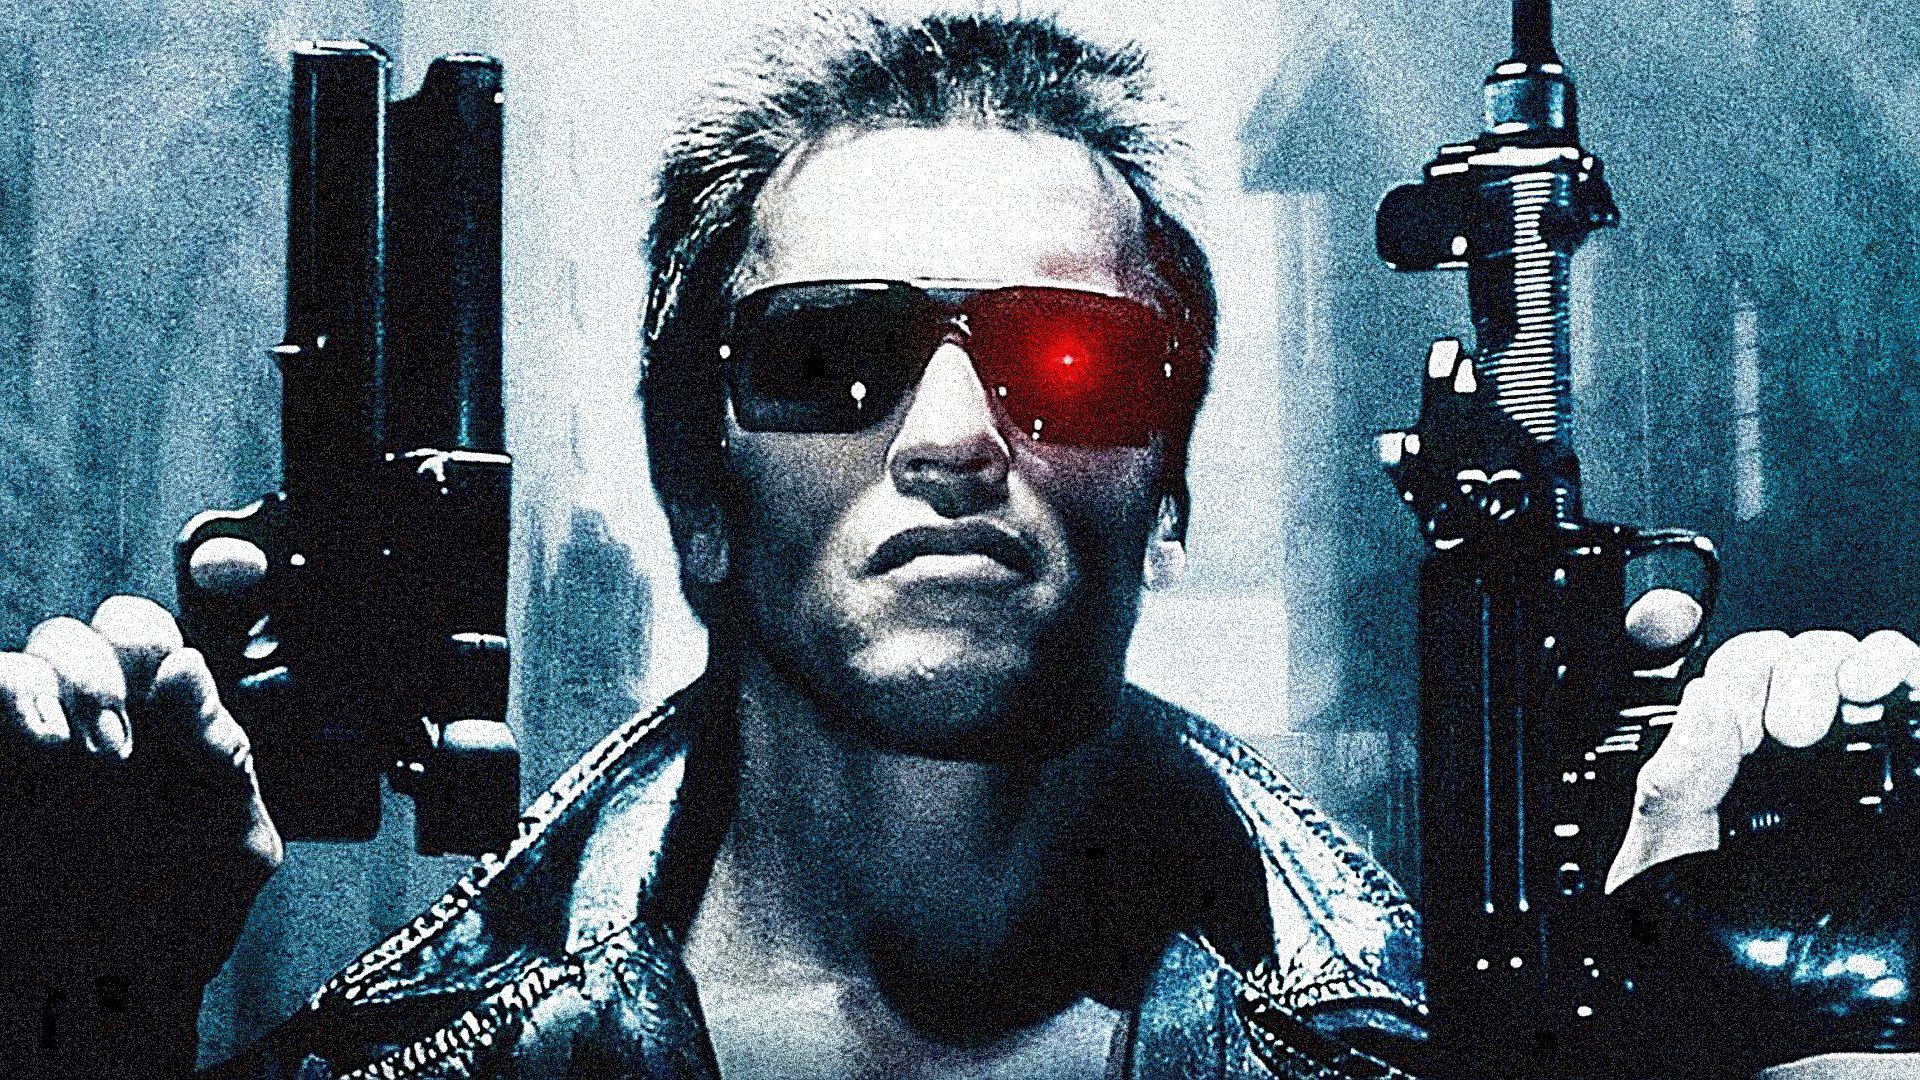 Terminator 2: Judgment Day Wallpapers - Wallpaper Cave